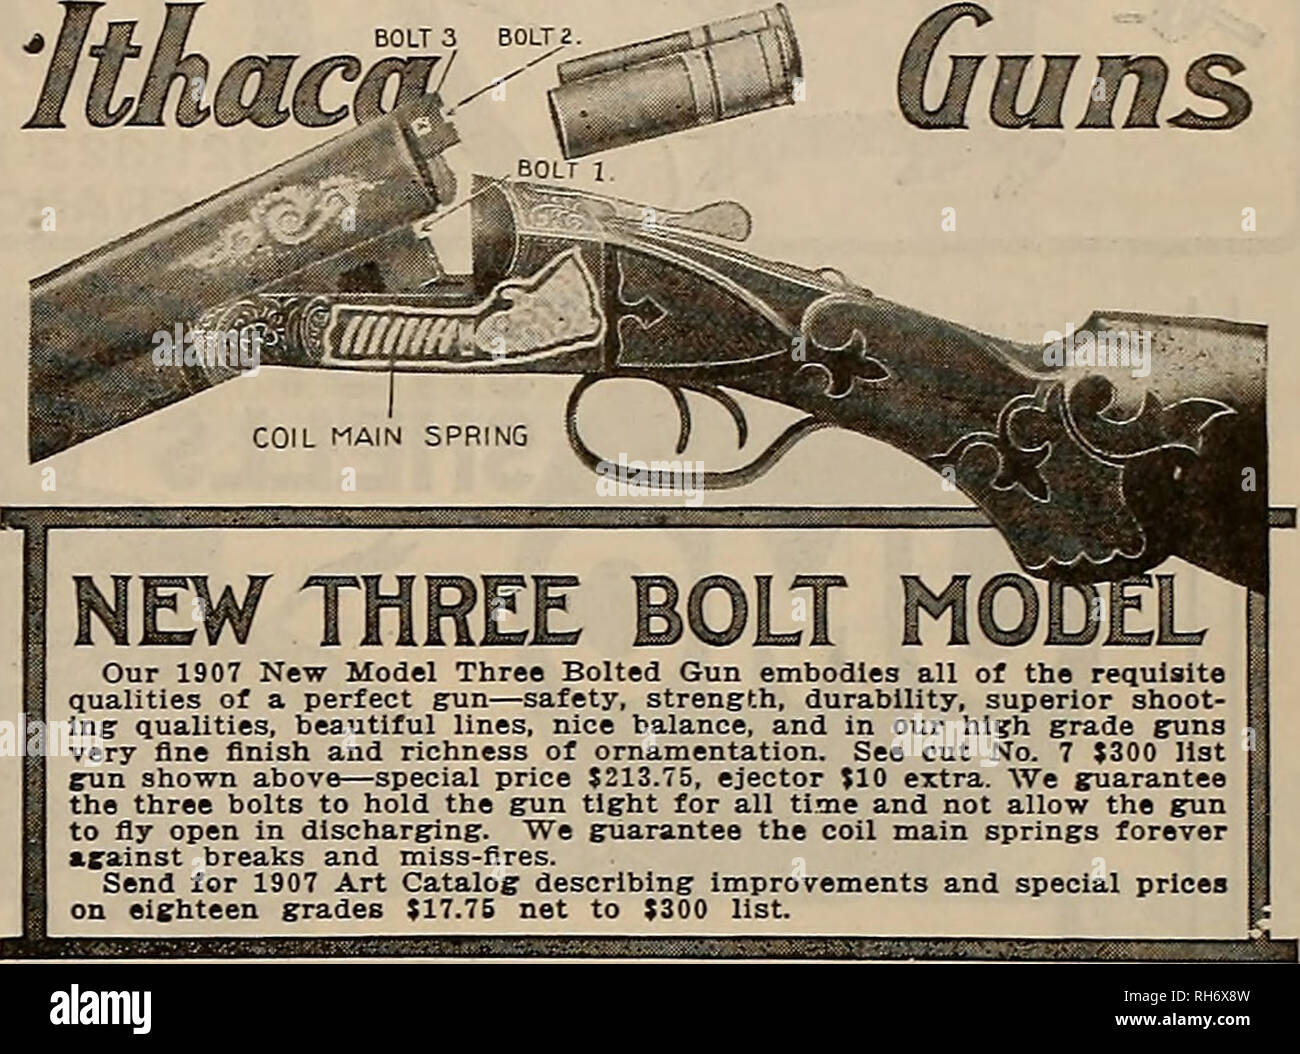 Breeder and sportsman. Horses. Fine Fishing Tackle, Cuns, Sporting and  Outing Goods Phone Temporary 1883. 5U J^arket 5^ §3,, FranCJSCO. NEW THREE  BOLT Our 1907 New Model Three Bolted Gun embodies